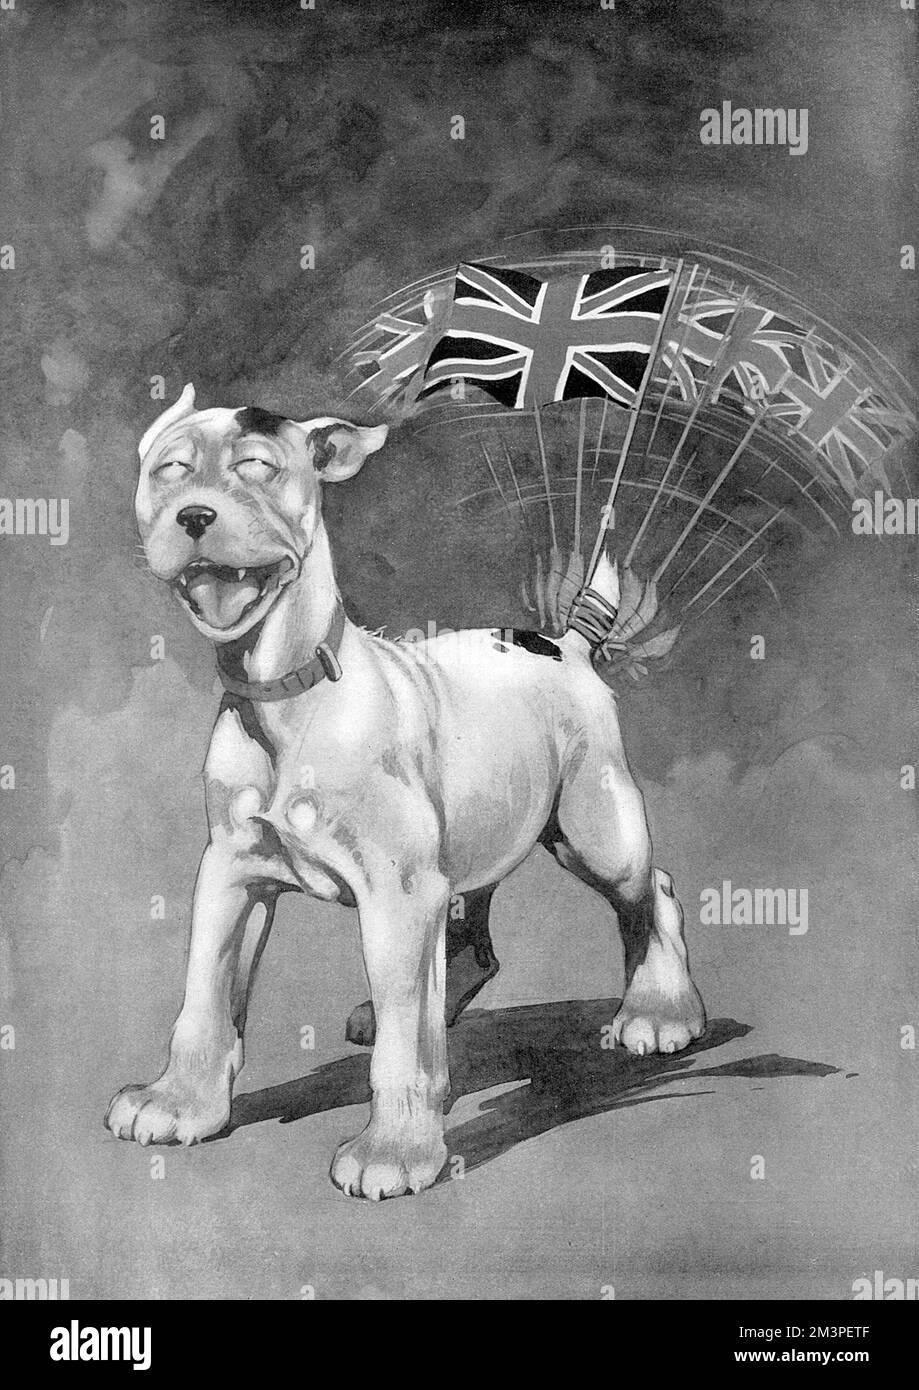 A joyful dog enthusiastically wags his tail, and, in the process, a Union Jack flag, in celebration at the end of the First World War.  The dog, drawn by George Studdy, is a forerunner of Studdy's world-famous canine creation, Bonzo, who emerged in The Sketch magazine in the early 1920s. Prior to that, Studdy drew a number of dog cartoons which were known simply as the 'Studdy Dog'.       Date: 1918 Stock Photo